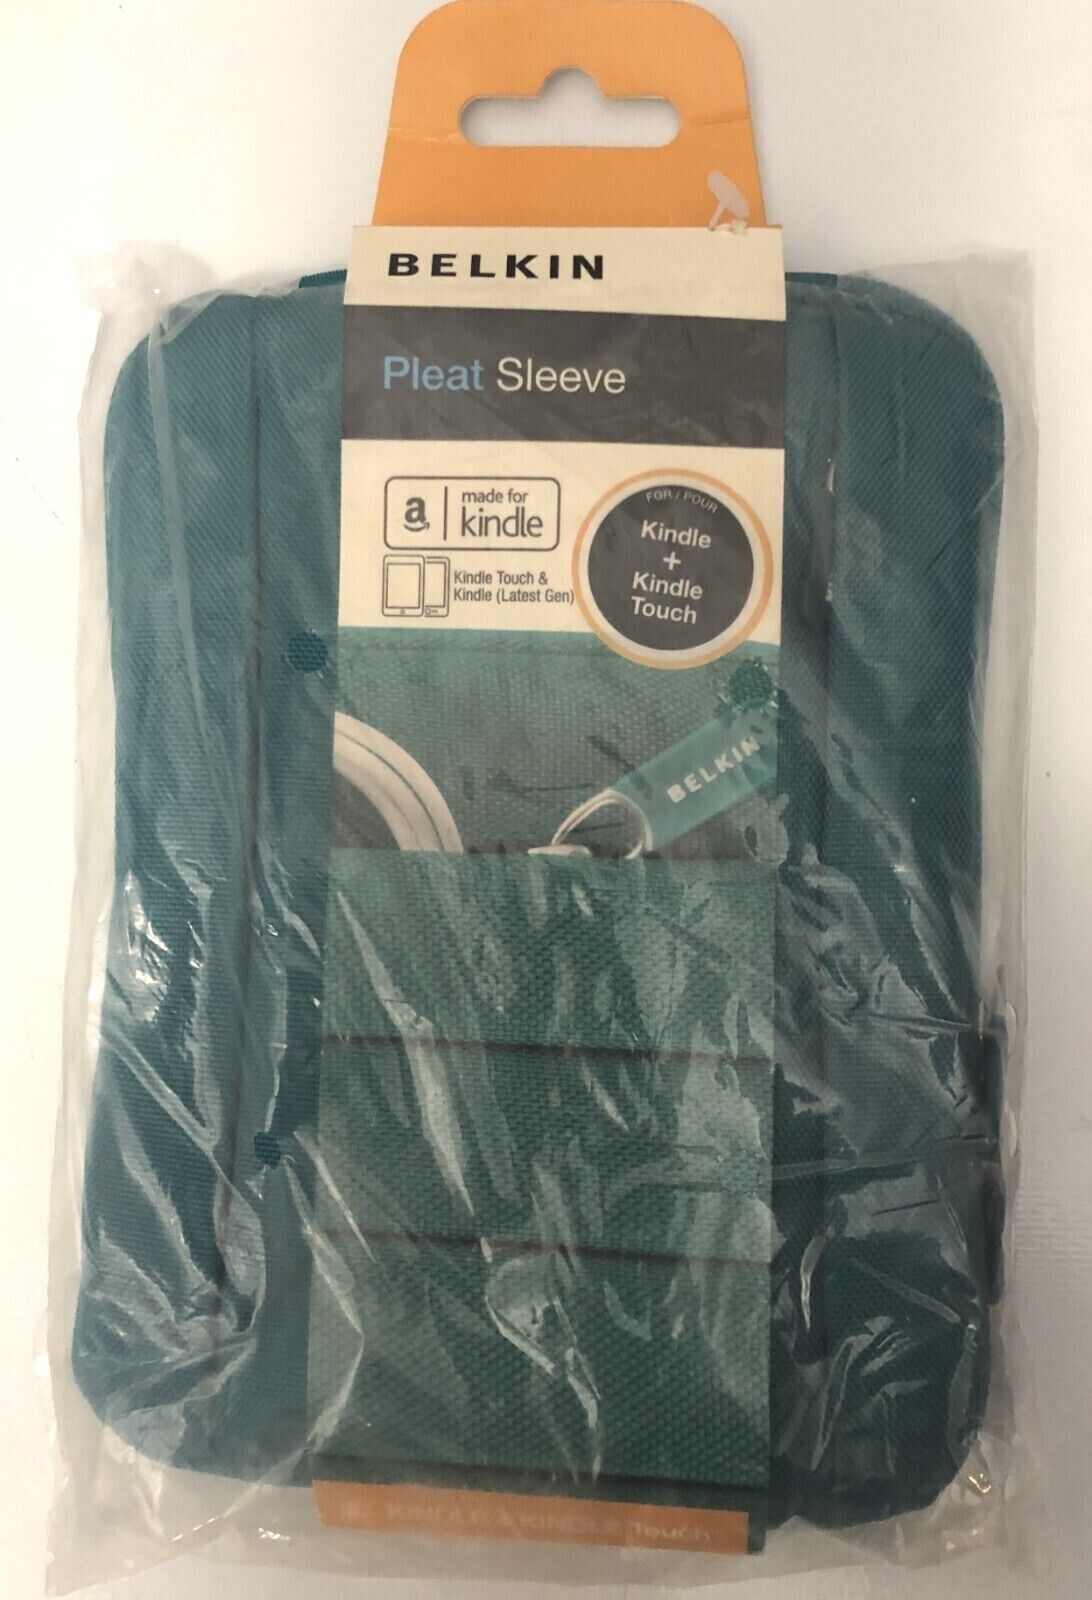 Belkin Pleat Sleeve for Kindle & Kindle Touch Slim Pleated Expandable Design